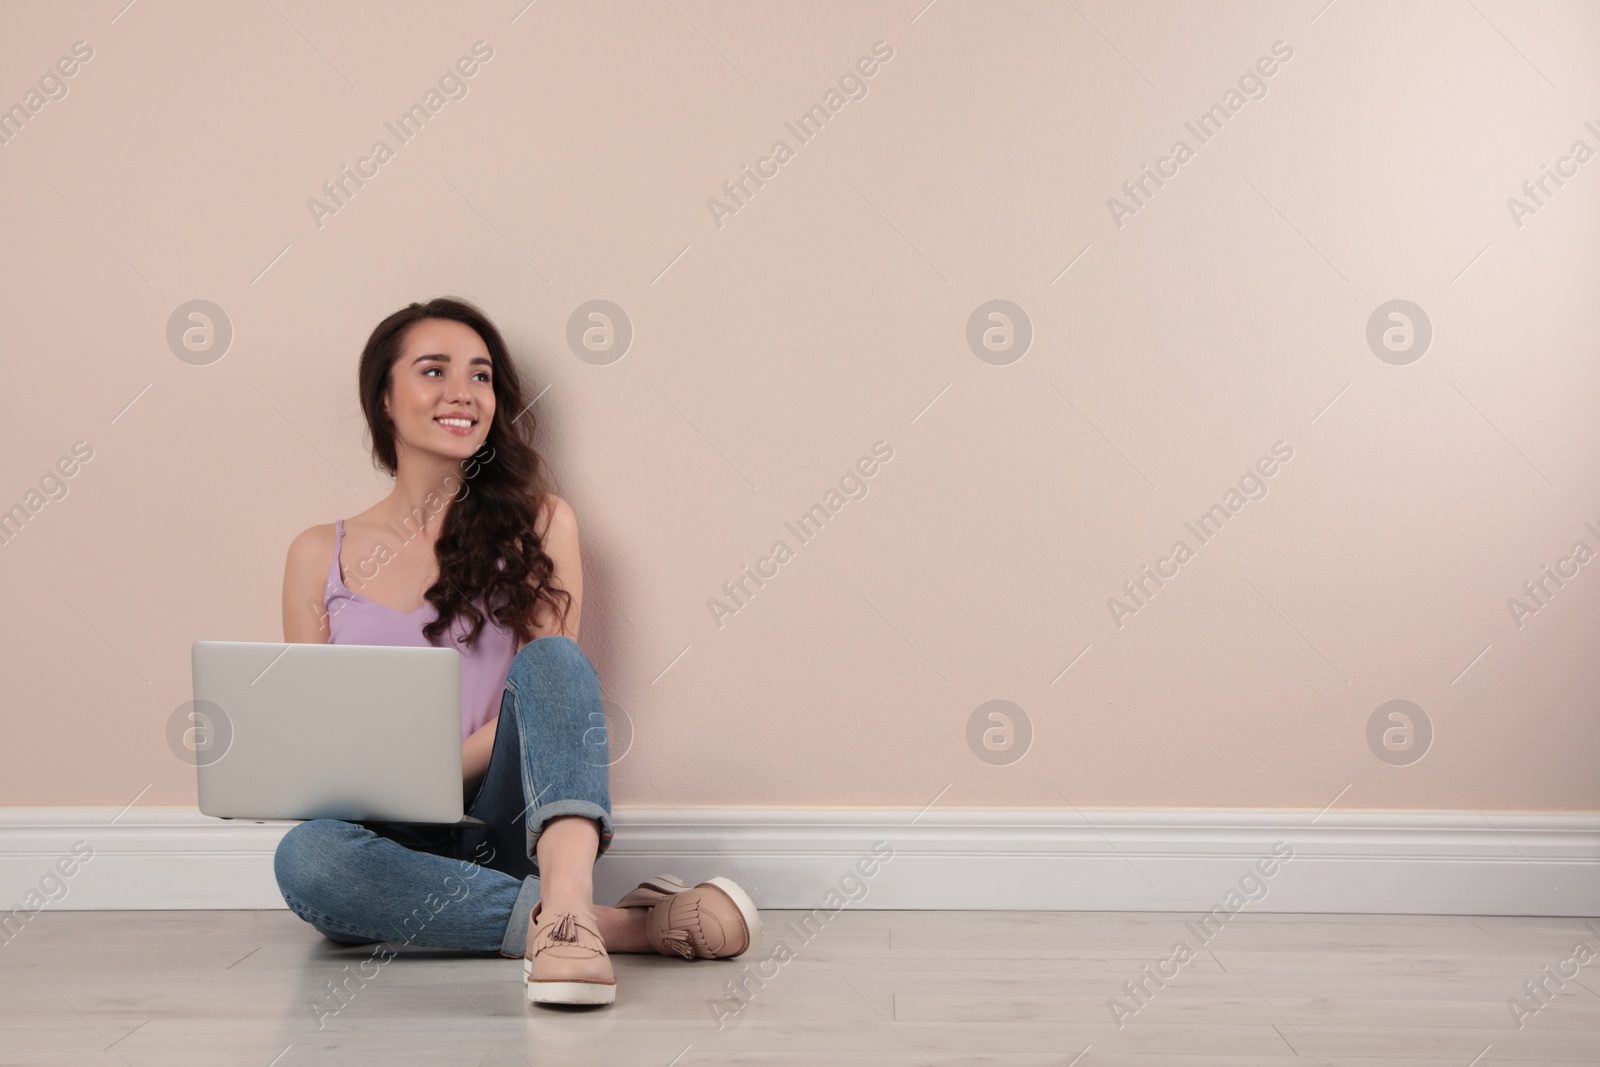 Photo of Young woman sitting with laptop near beige wall. Space for text